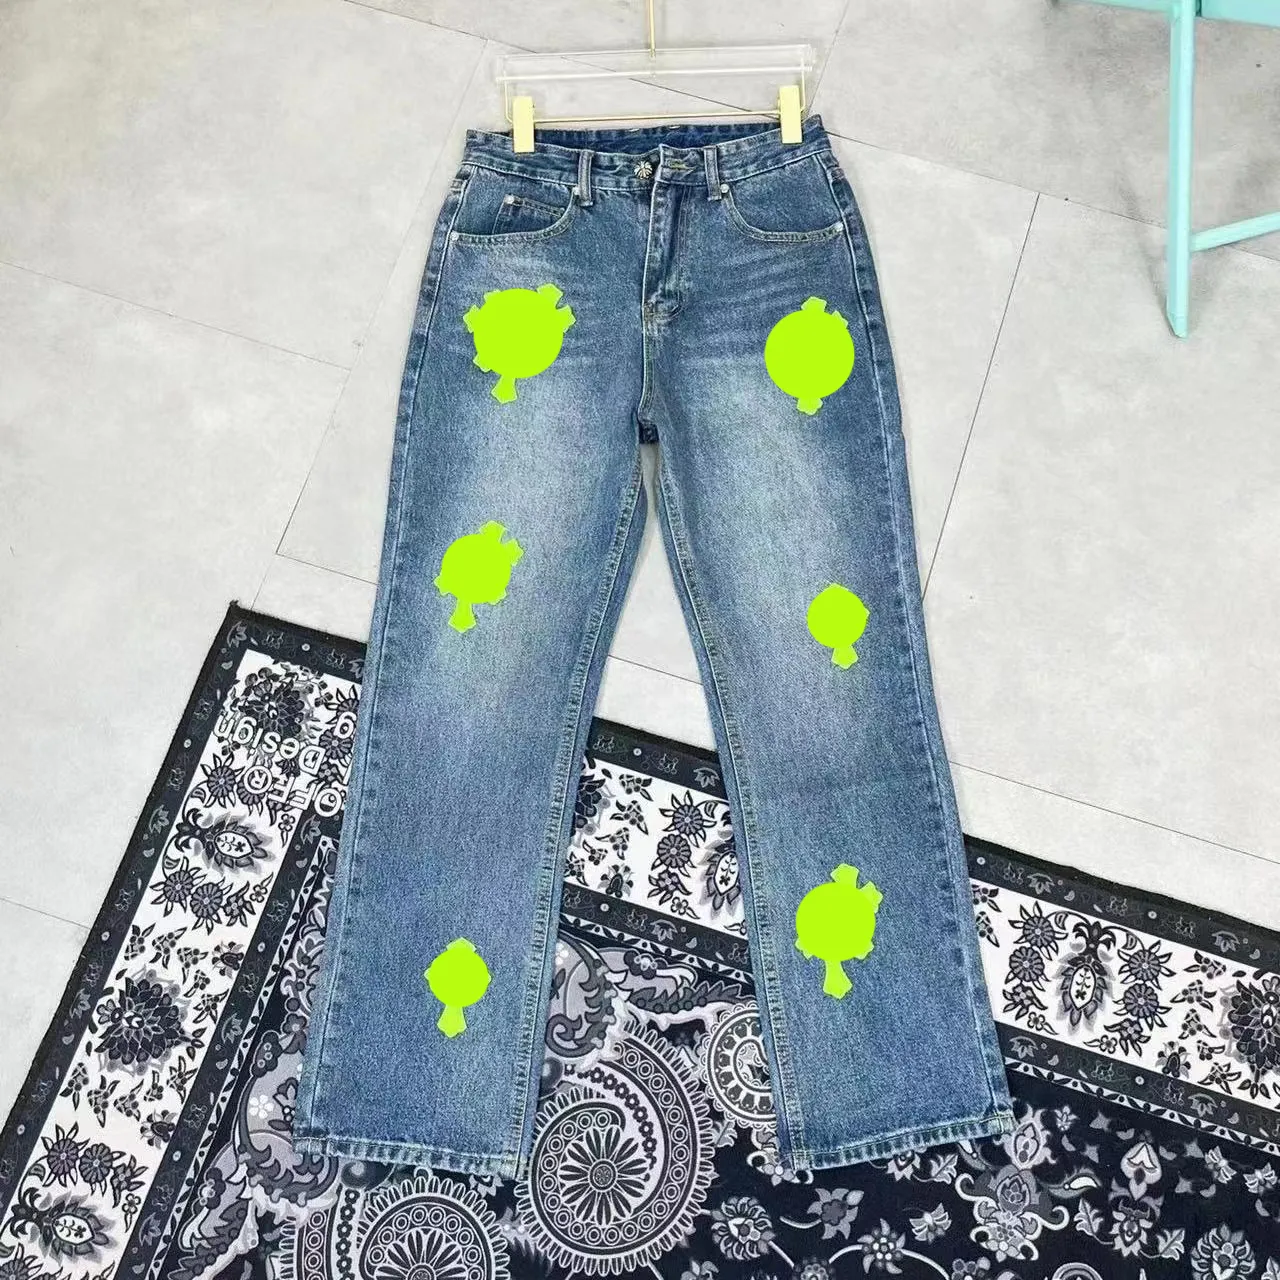 Jeans Designer Make Old Washed Chrome Straight Trousers Heart Letter Prints for Women Men Casual Long Style 129279c